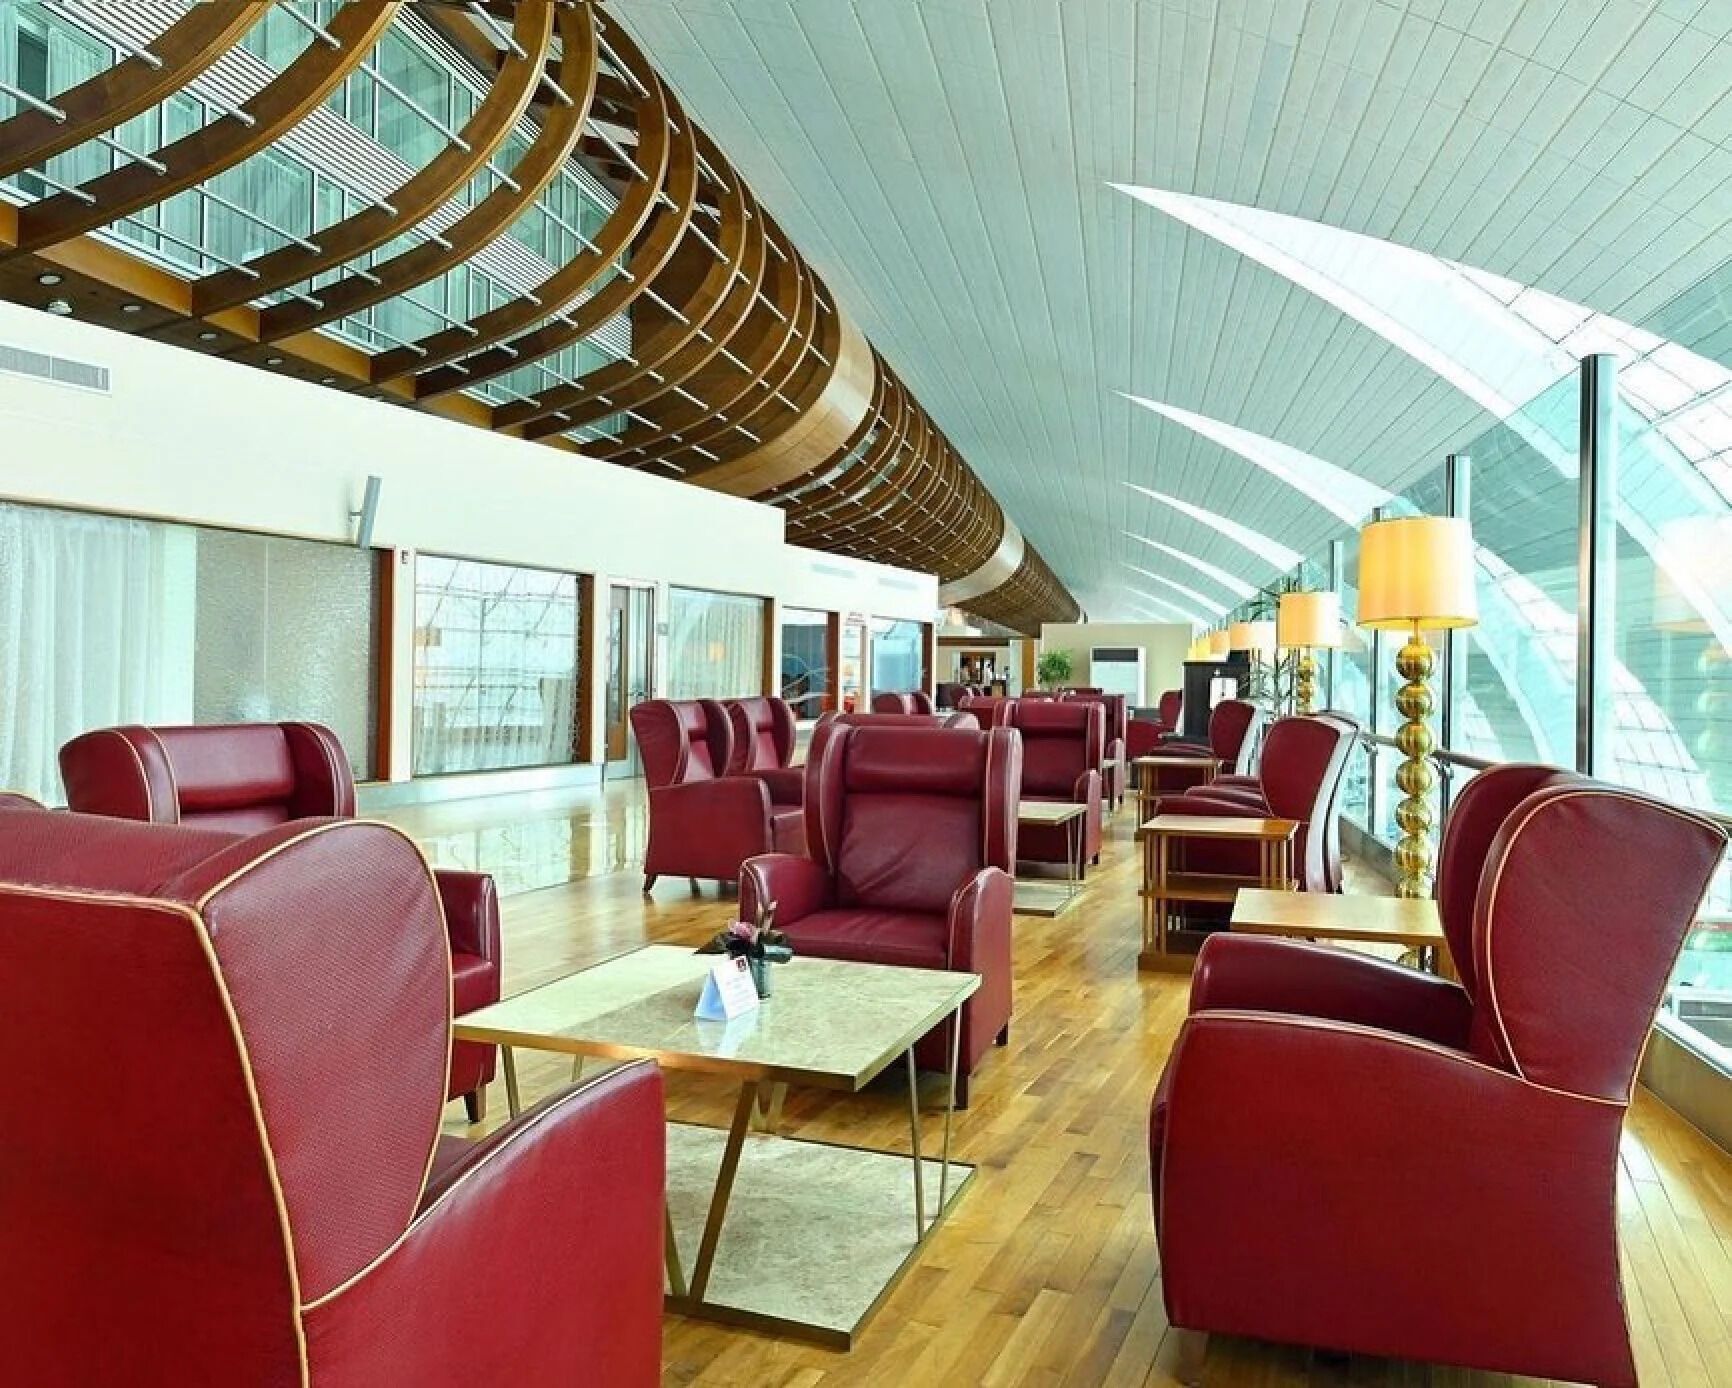 Spa centers, private lounges, gourmet dining: 7 of the most luxurious airport lounges for luxury travelers